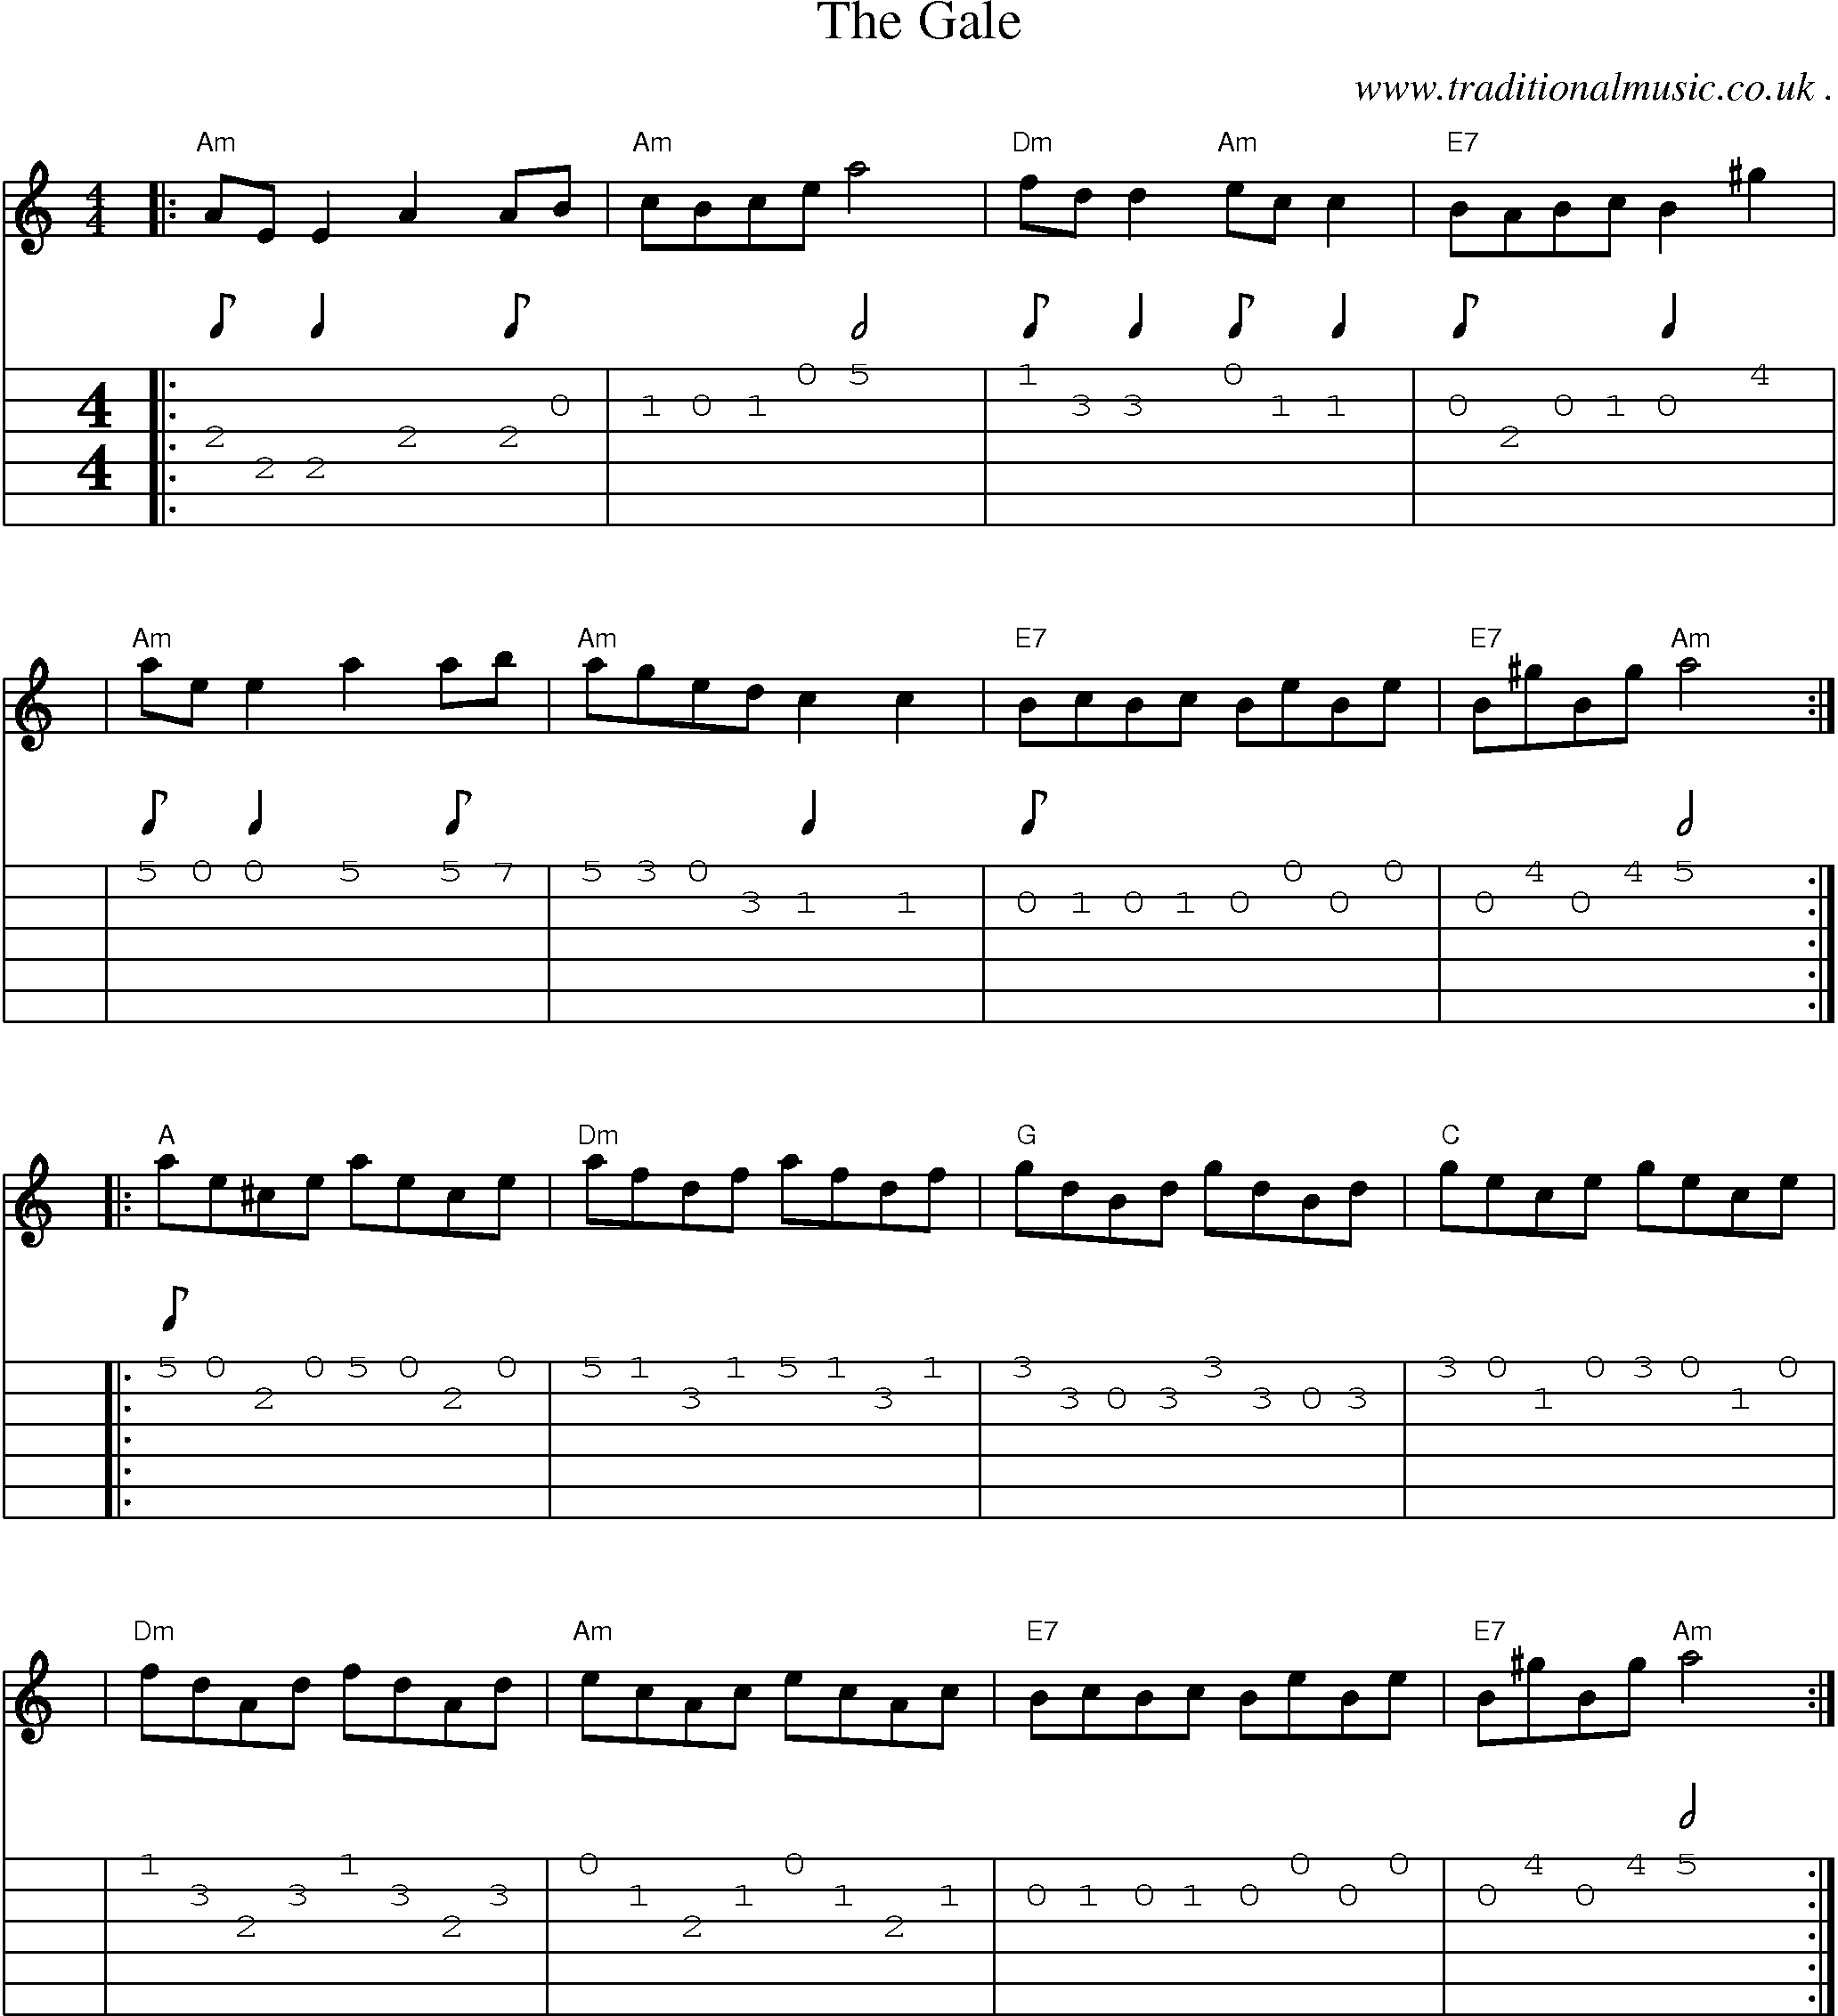 Sheet-music  score, Chords and Guitar Tabs for The Gale